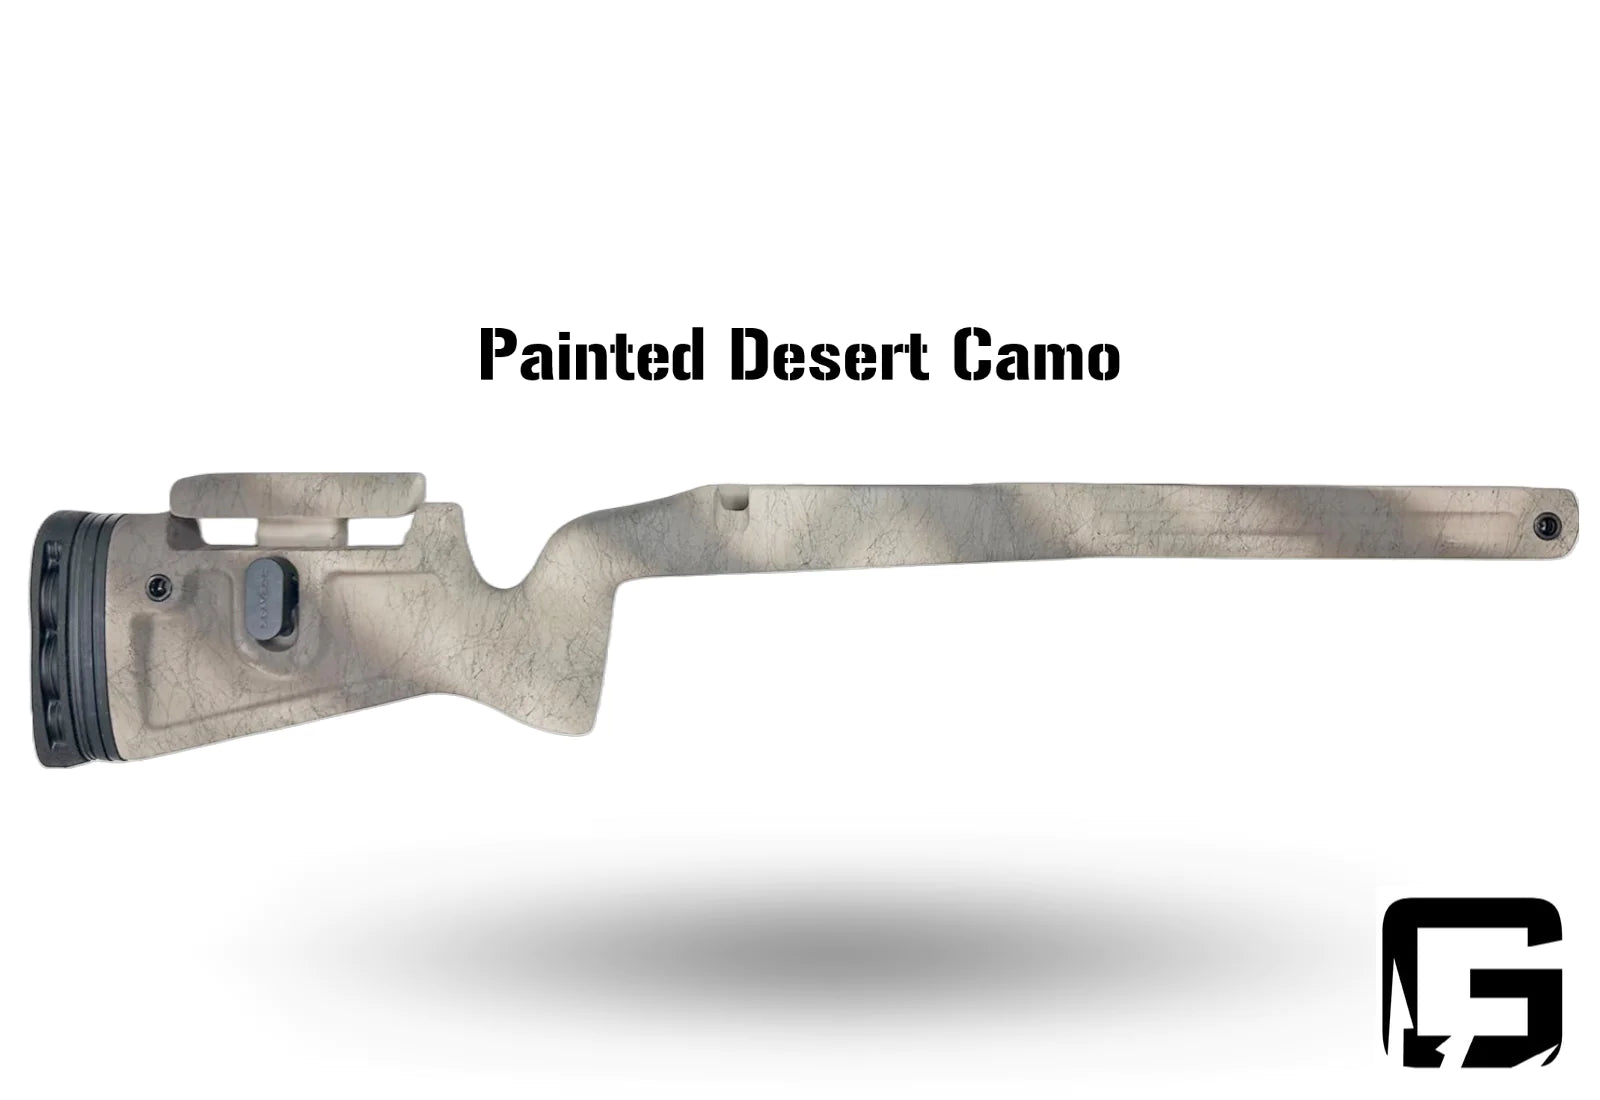 Phoenix 2 - Right Hand Short Action Savage 110, Factory Savage DBM w/ AICS Mags, Fits any barrel.  Painted Desert Camo